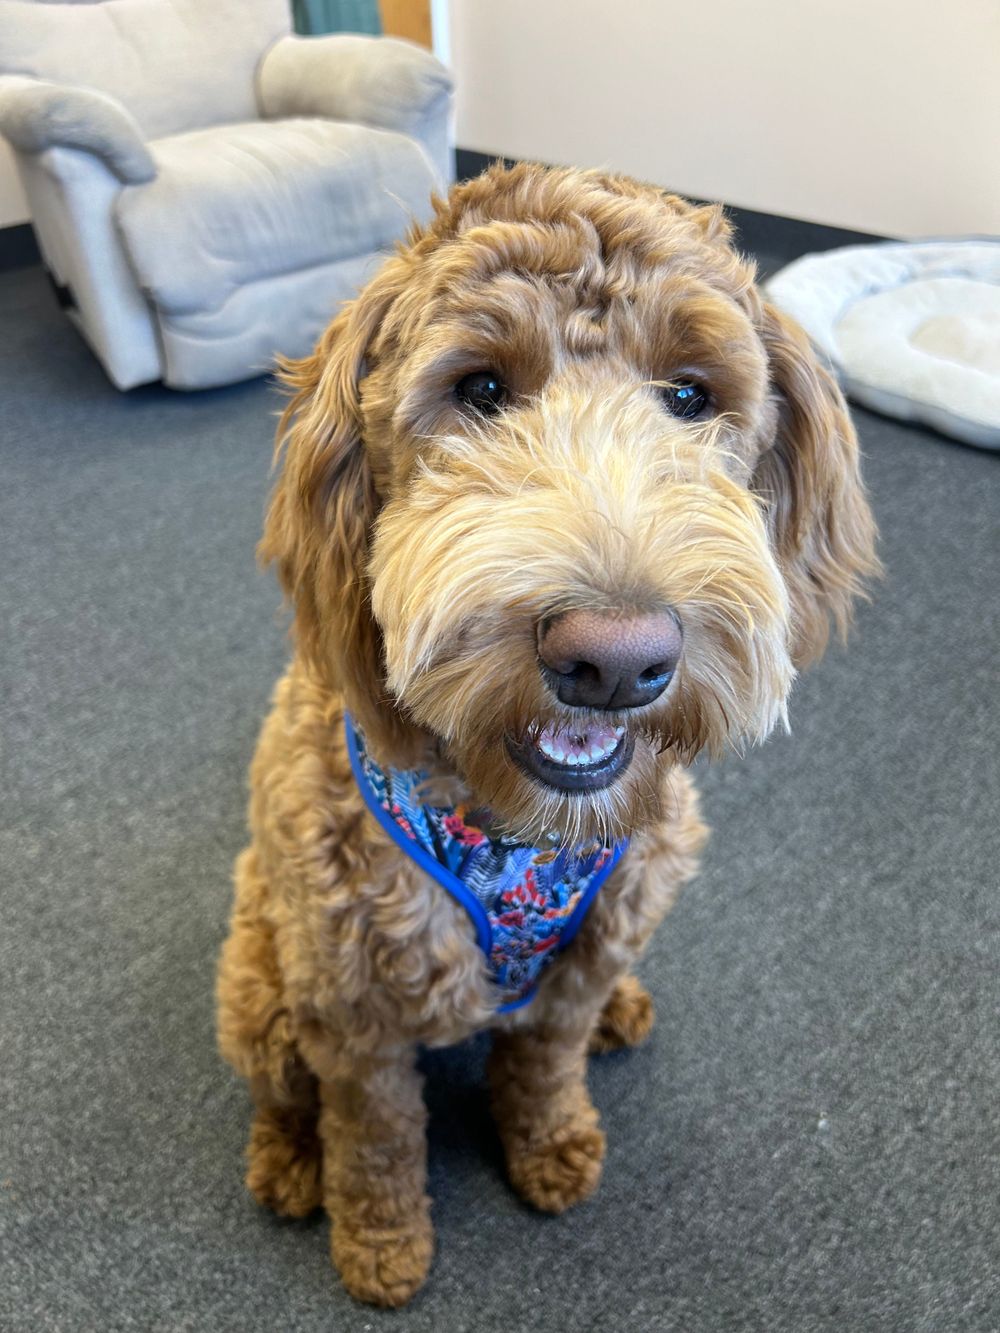 Buddy is Mindful LLC's therapy pup and joins Dave in the office a few times a week.  